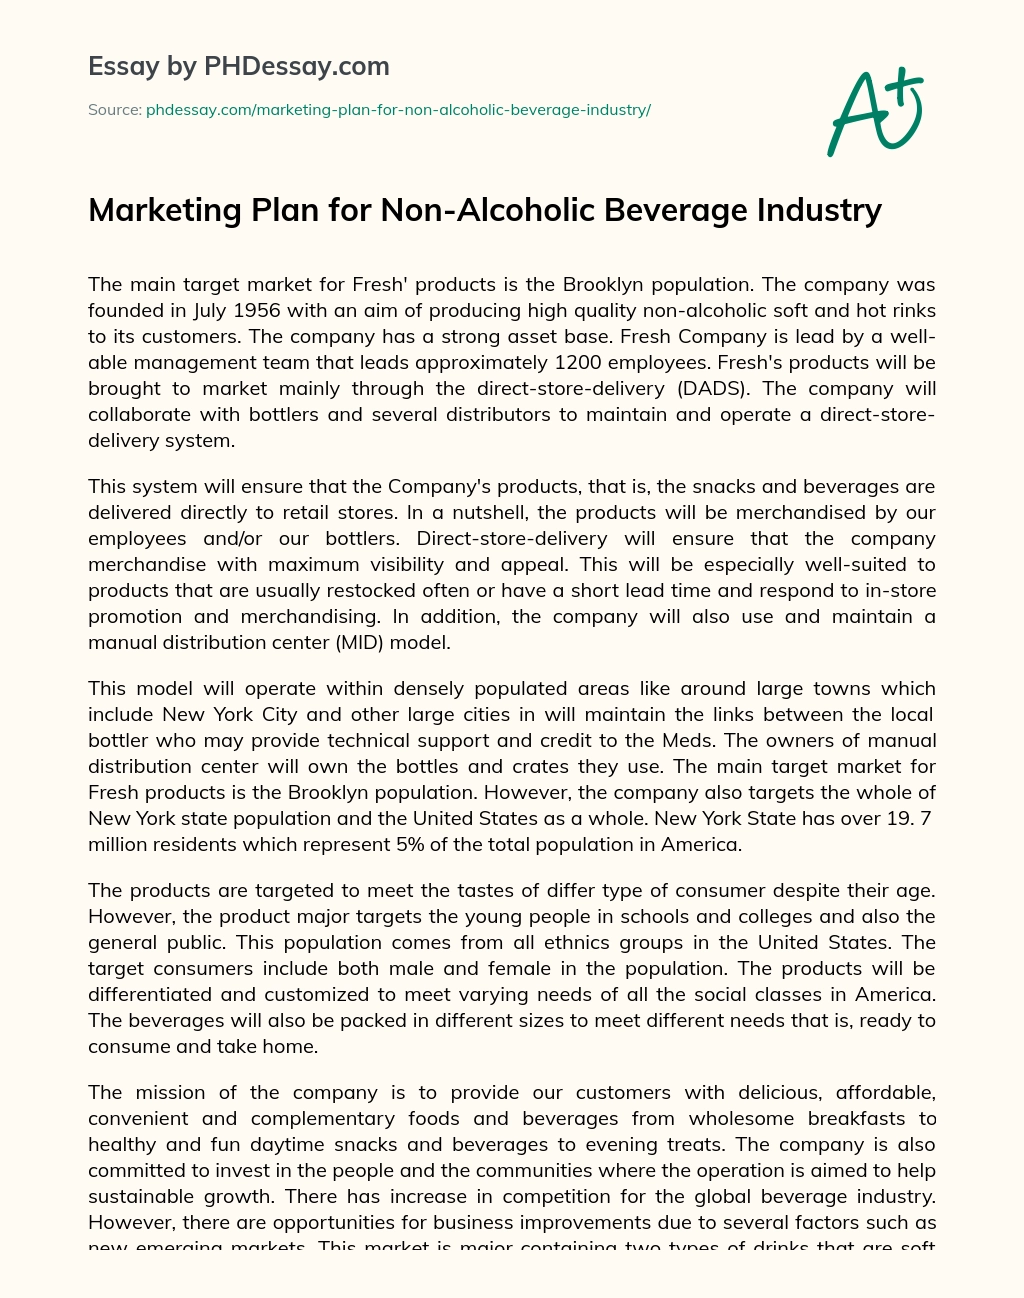 Marketing Plan for Non-Alcoholic Beverage Industry essay